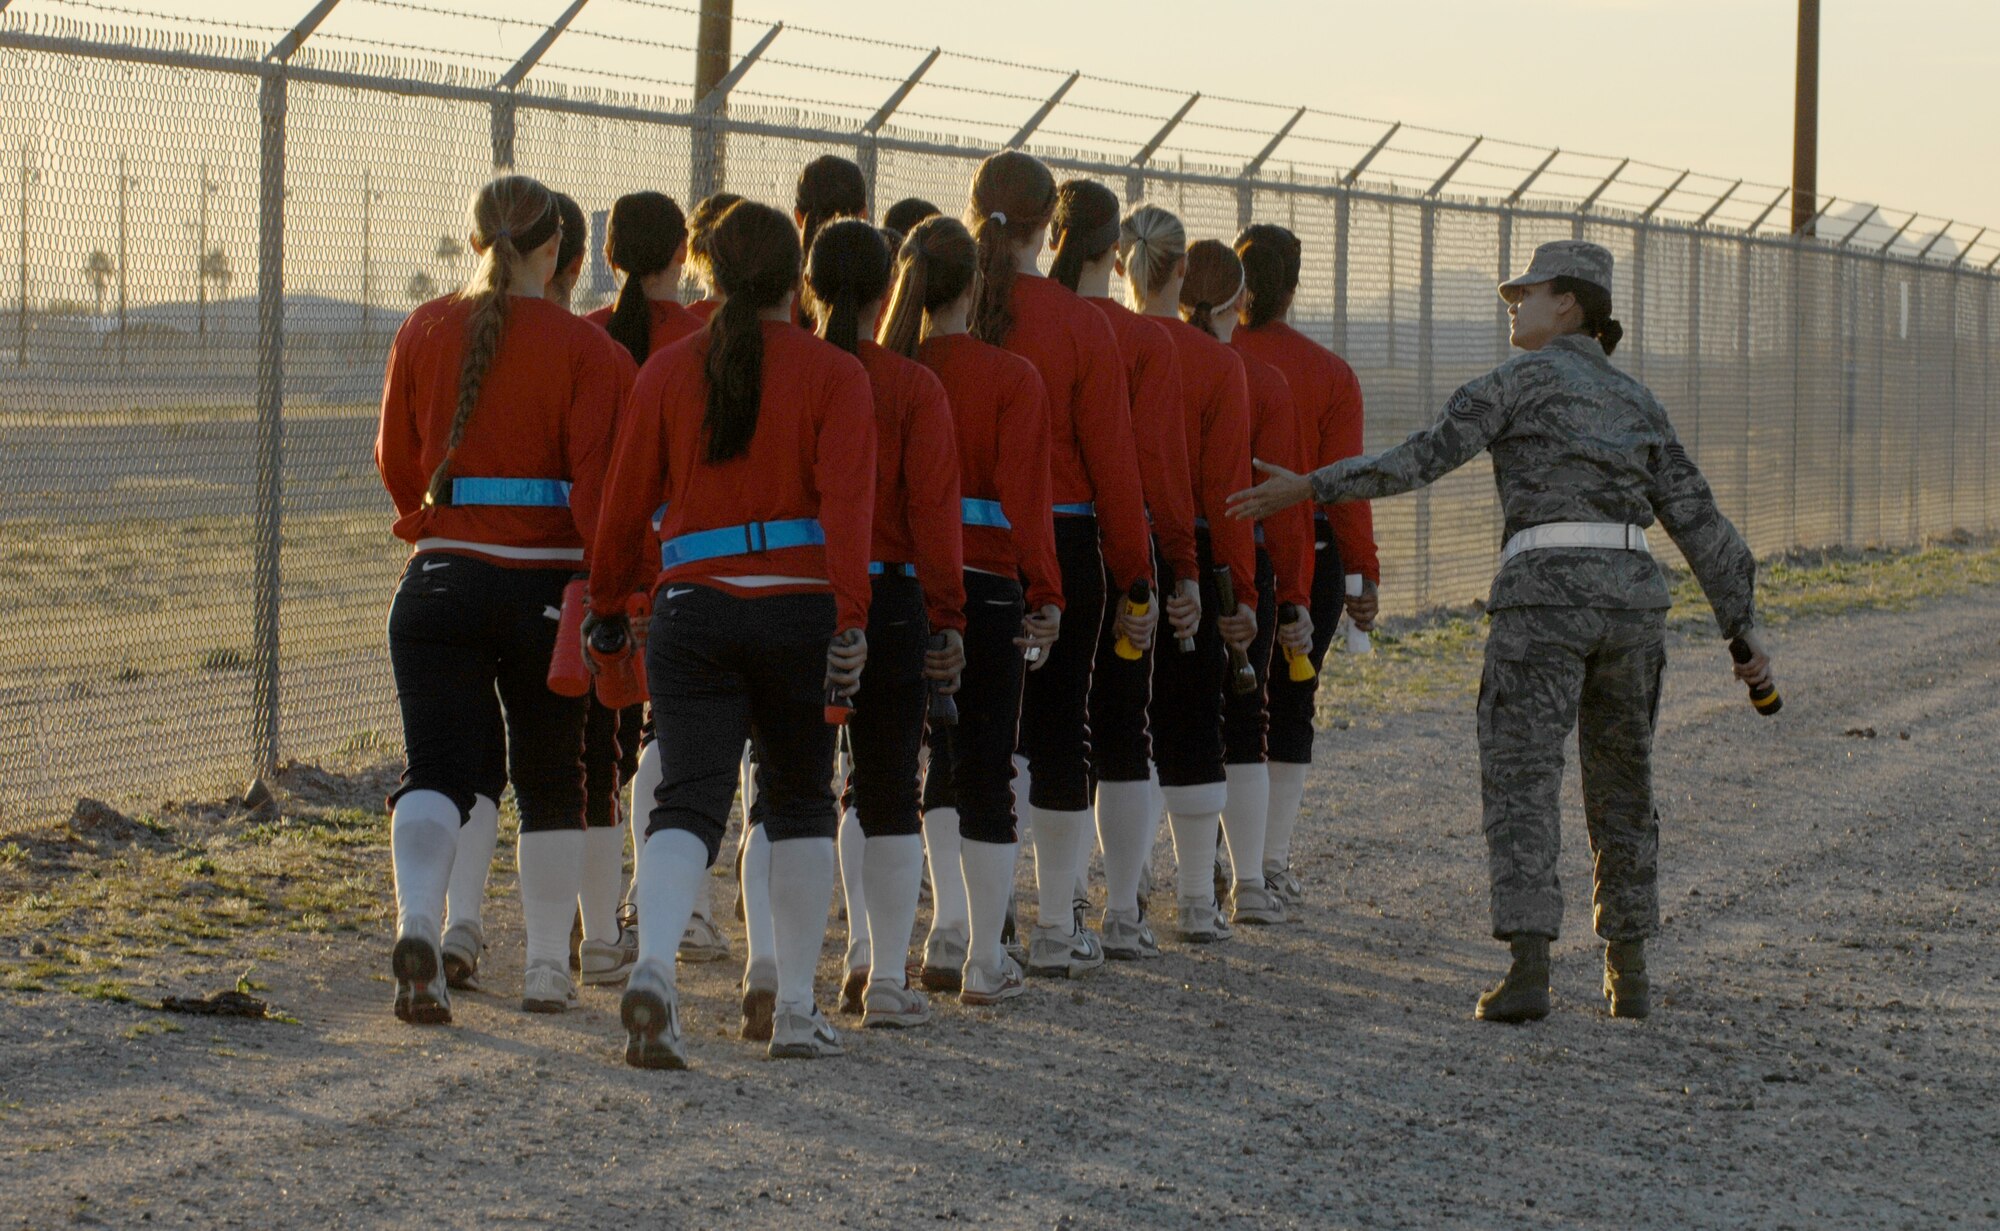 U.S. Air Force Tech. Sgt. Carrie Nunez, former military training instructor, teaches the University of Arizona softball team how to march on Davis-Monthan Air Force Base, Ariz., Jan. 13, 2012. The softball team had just finished running through the obstacle course. (U.S. Air Force photo by Airman 1st Class Josh Slavin/Released)